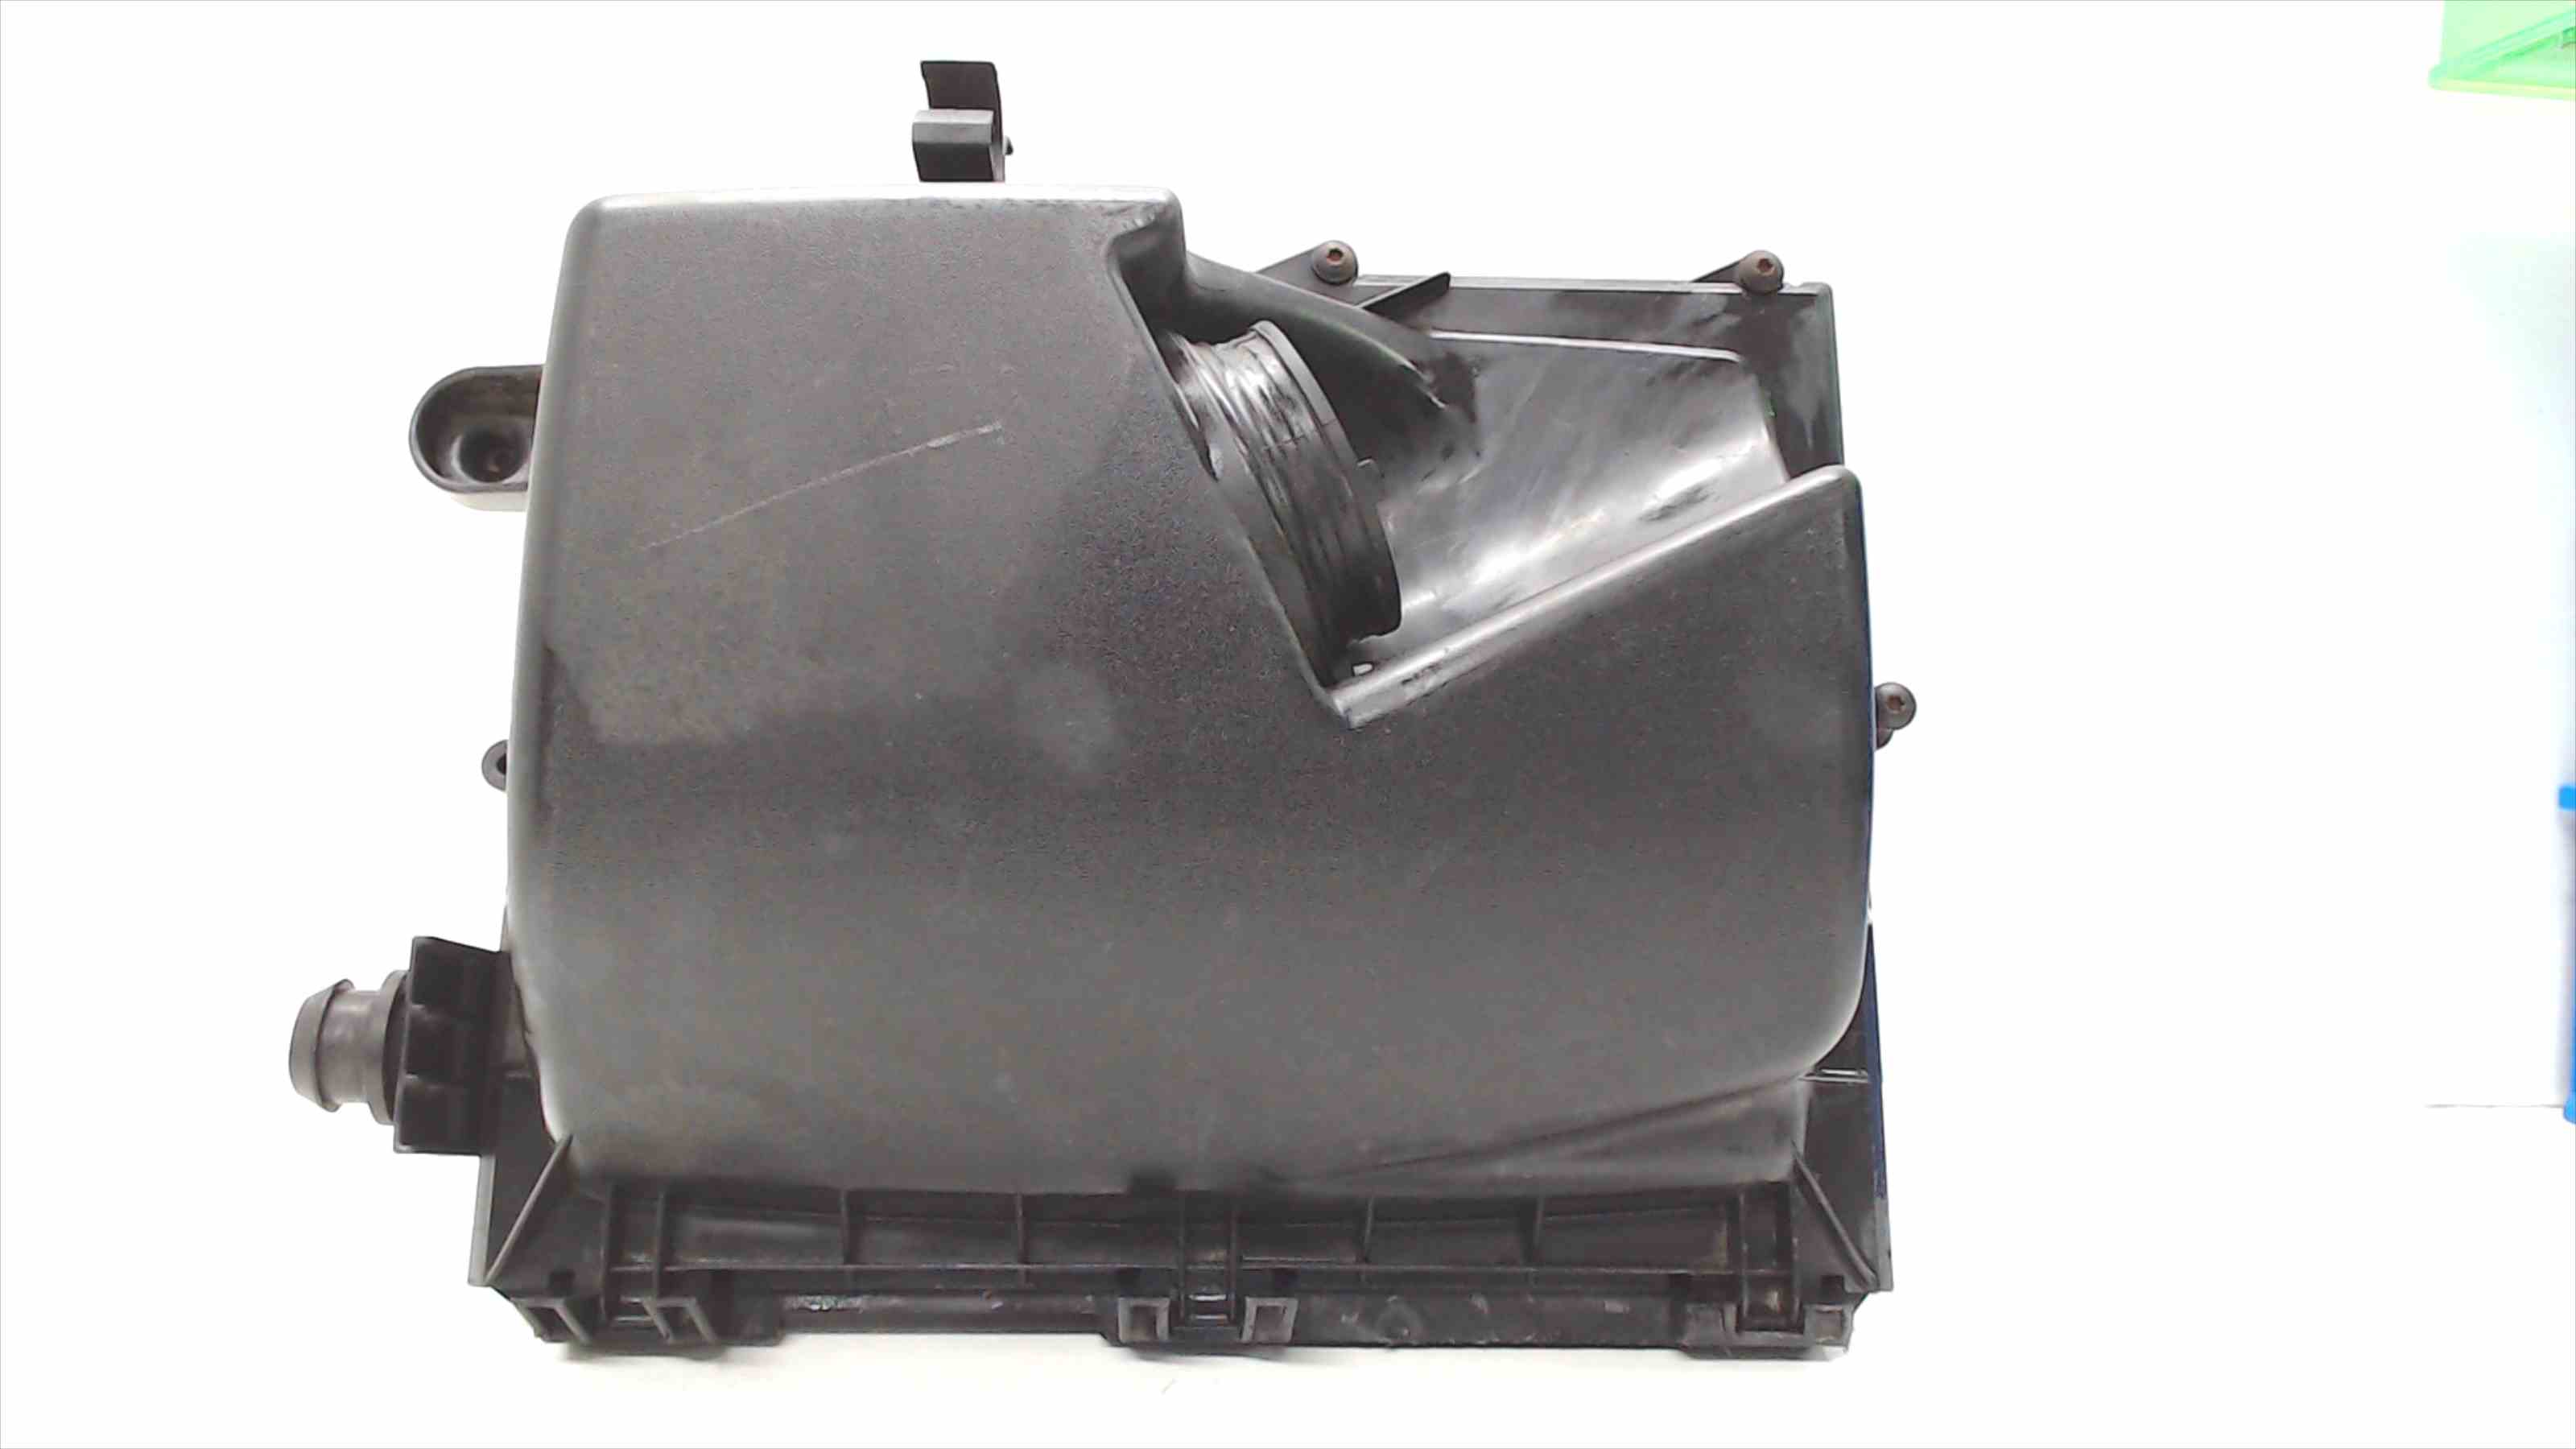 OPEL Vectra Other Engine Compartment Parts 55350912 24687550